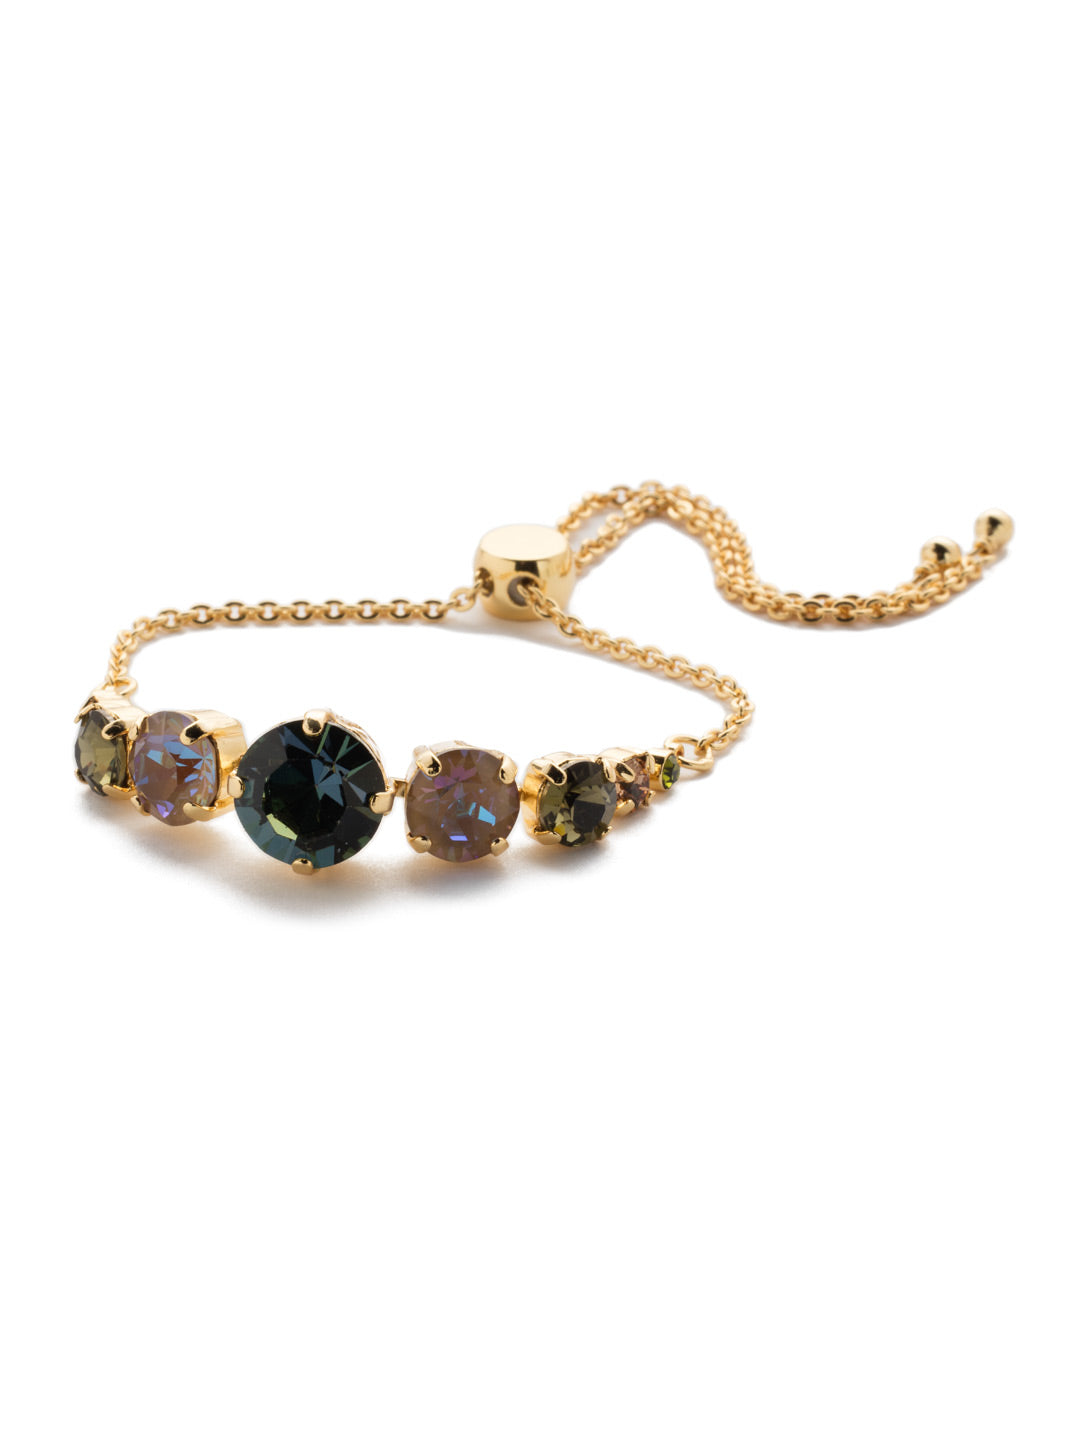 London Slider Bracelet - BCQ140BGCSM - Slip on the London Slider Bracelet and adjust to your perfect fit. It's just the piece when you're looking to bling it on with some crystal sparkle. From Sorrelli's Cashmere collection in our Bright Gold-tone finish.